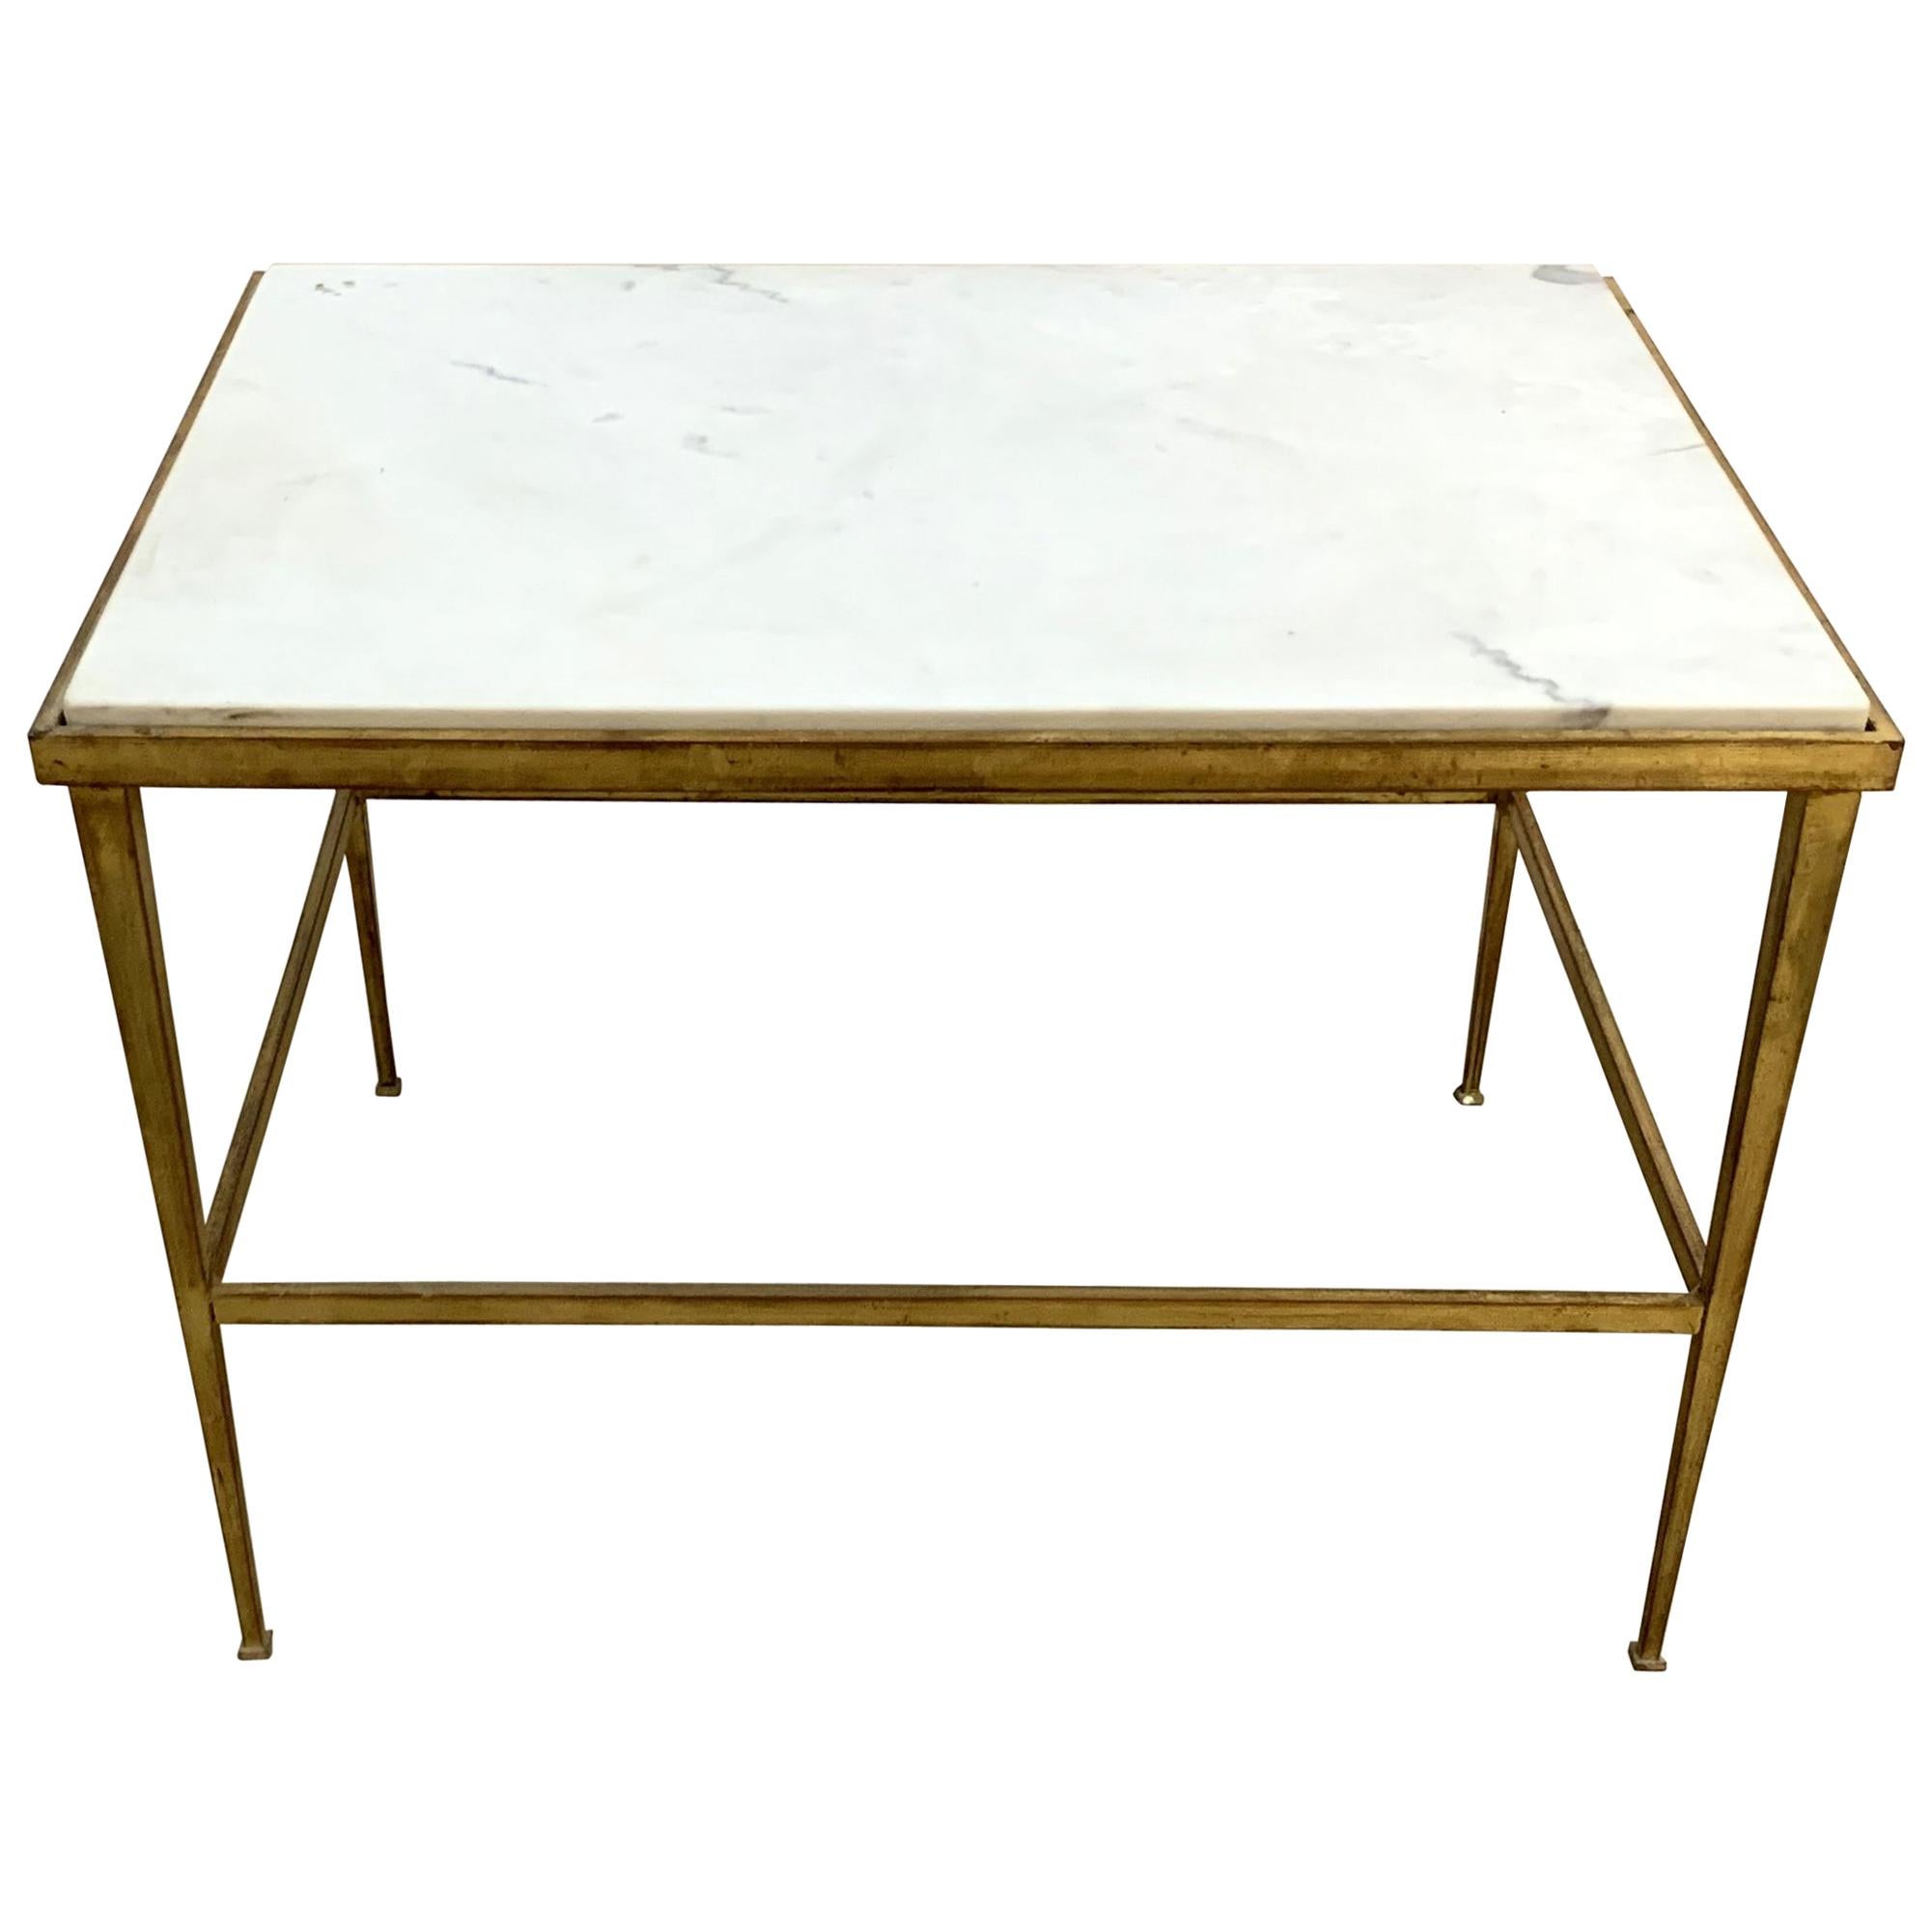 Fine Mid-Century Modern French Gold Gilt Iron Marble-Top Cocktail Coffee Table